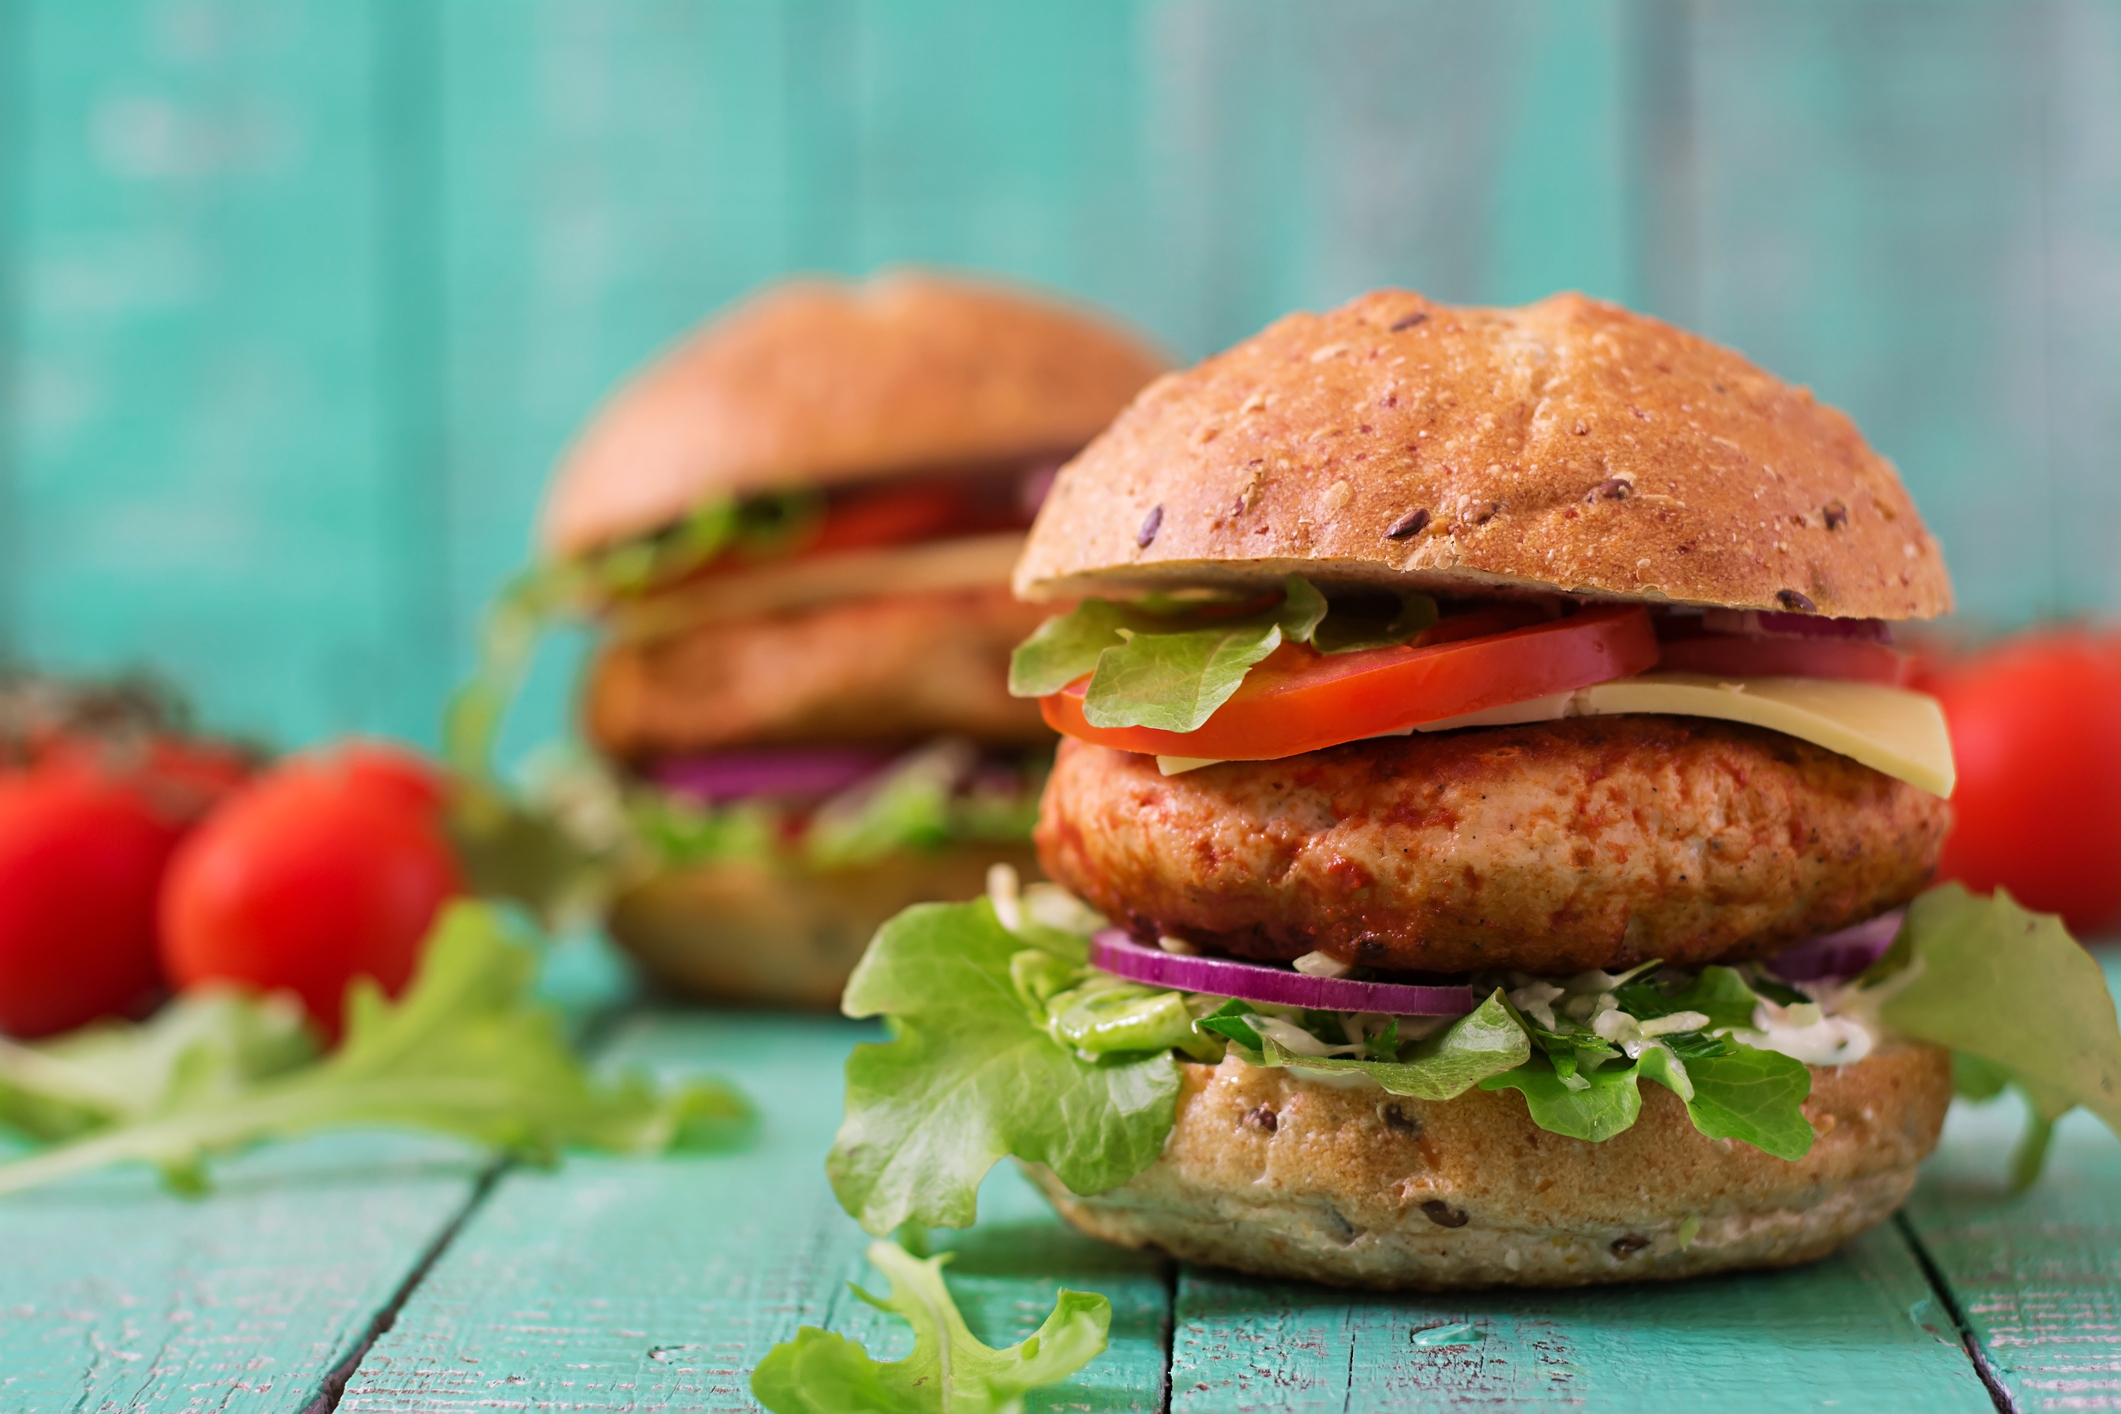 Turkey burgers have long been known as a "healthy" alternative. 